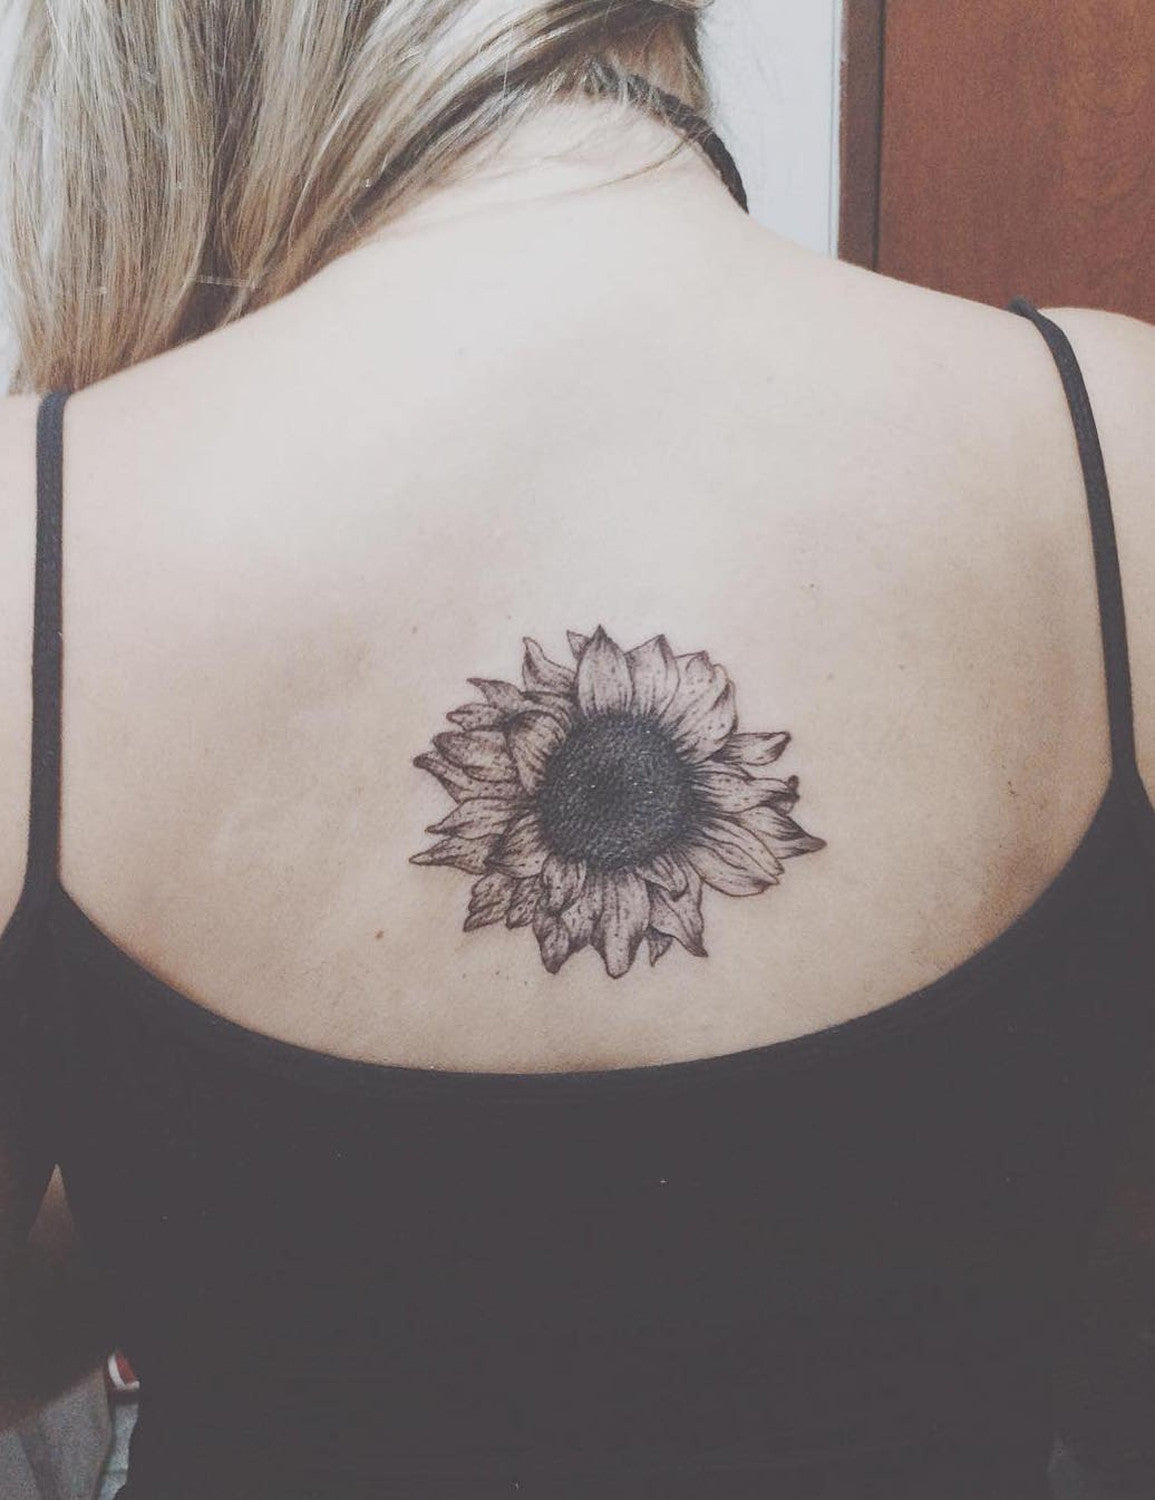 Small Black and White Floral Flower Sunflower Spine Tattoo Ideas for Women at MyBodiArt.com 